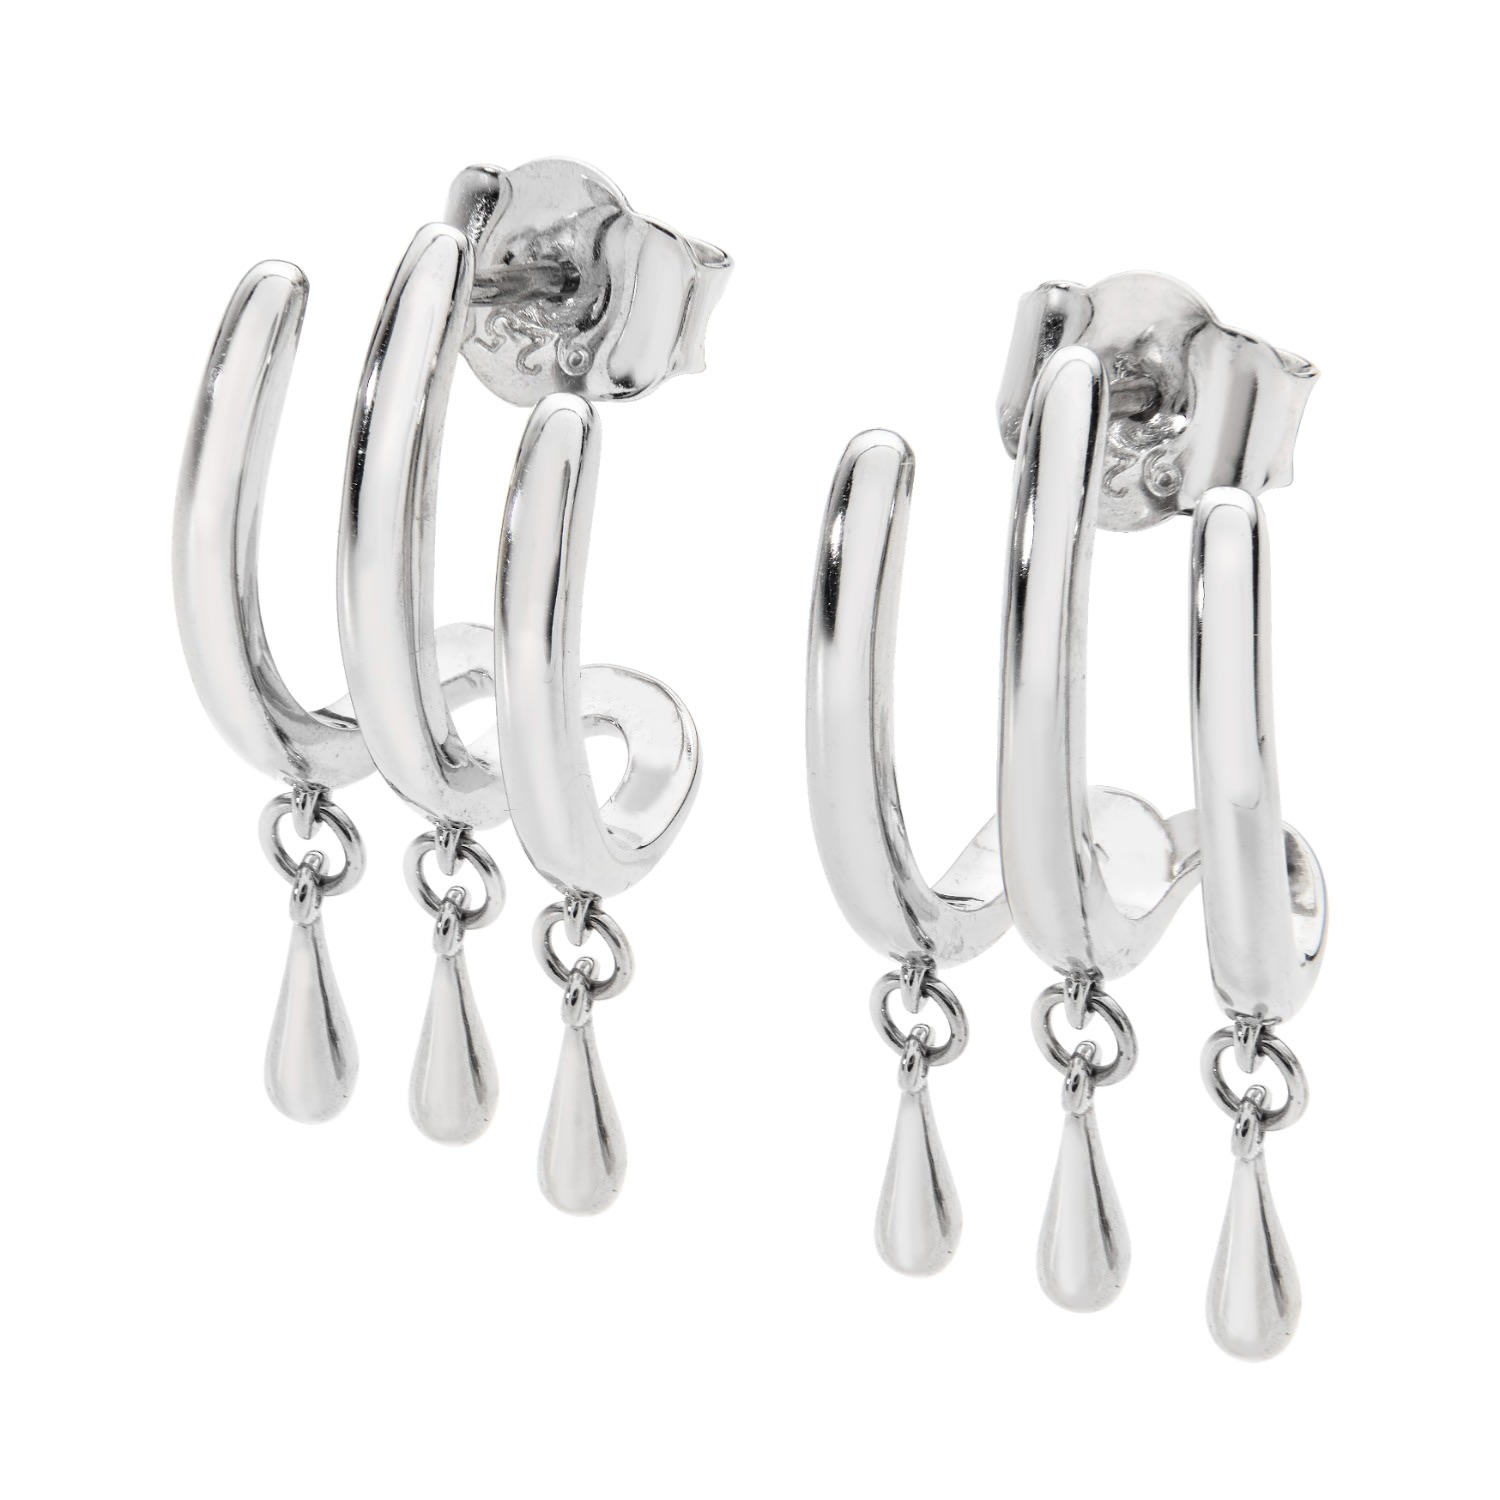 Lucy Quartermaine Women's Silver Waterfall Three Hoop Studs With Drips